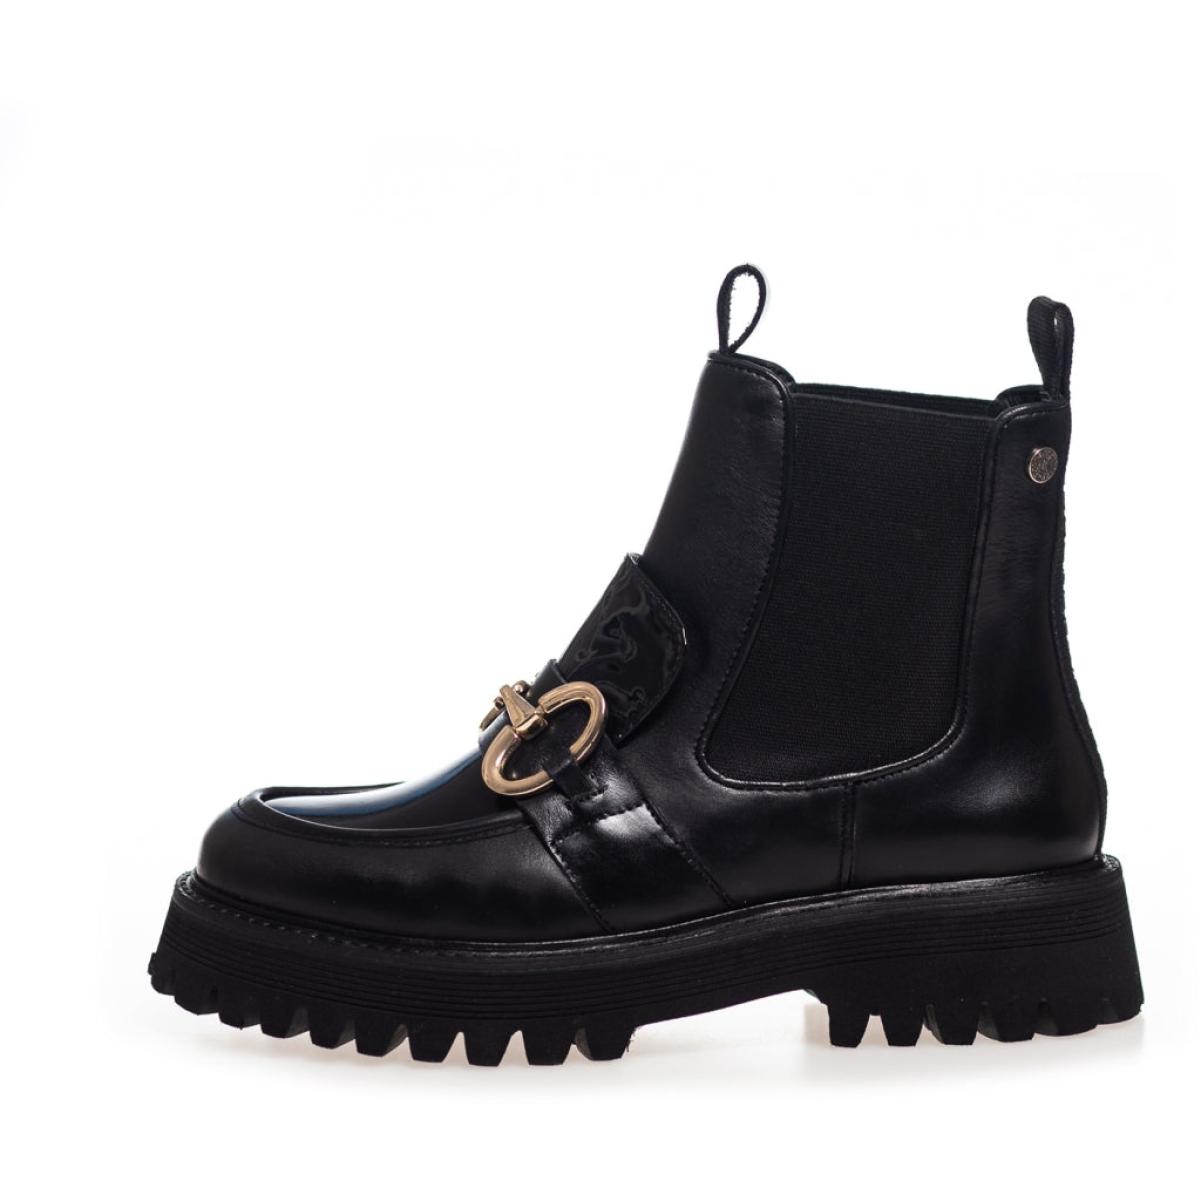 All I Want - Black Ankle Boots Women Introductory Offer Copenhagen Shoes